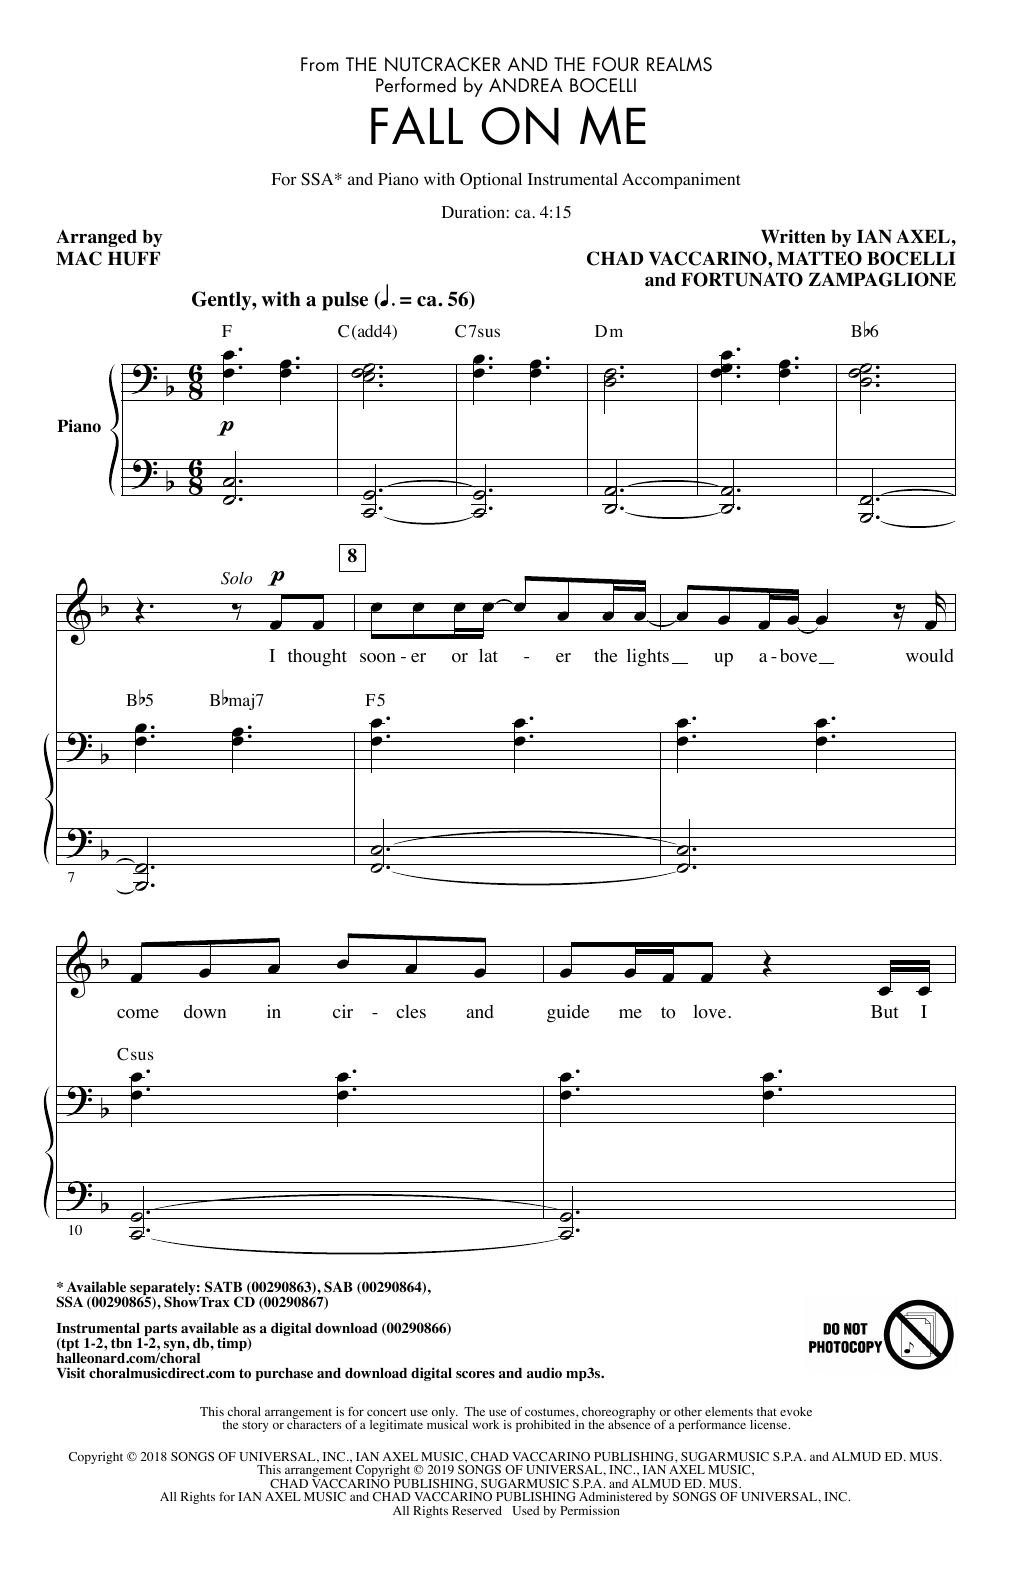 Download Andrea Bocelli & Matteo Bocelli Fall On Me (from The Nutcracker and the Sheet Music